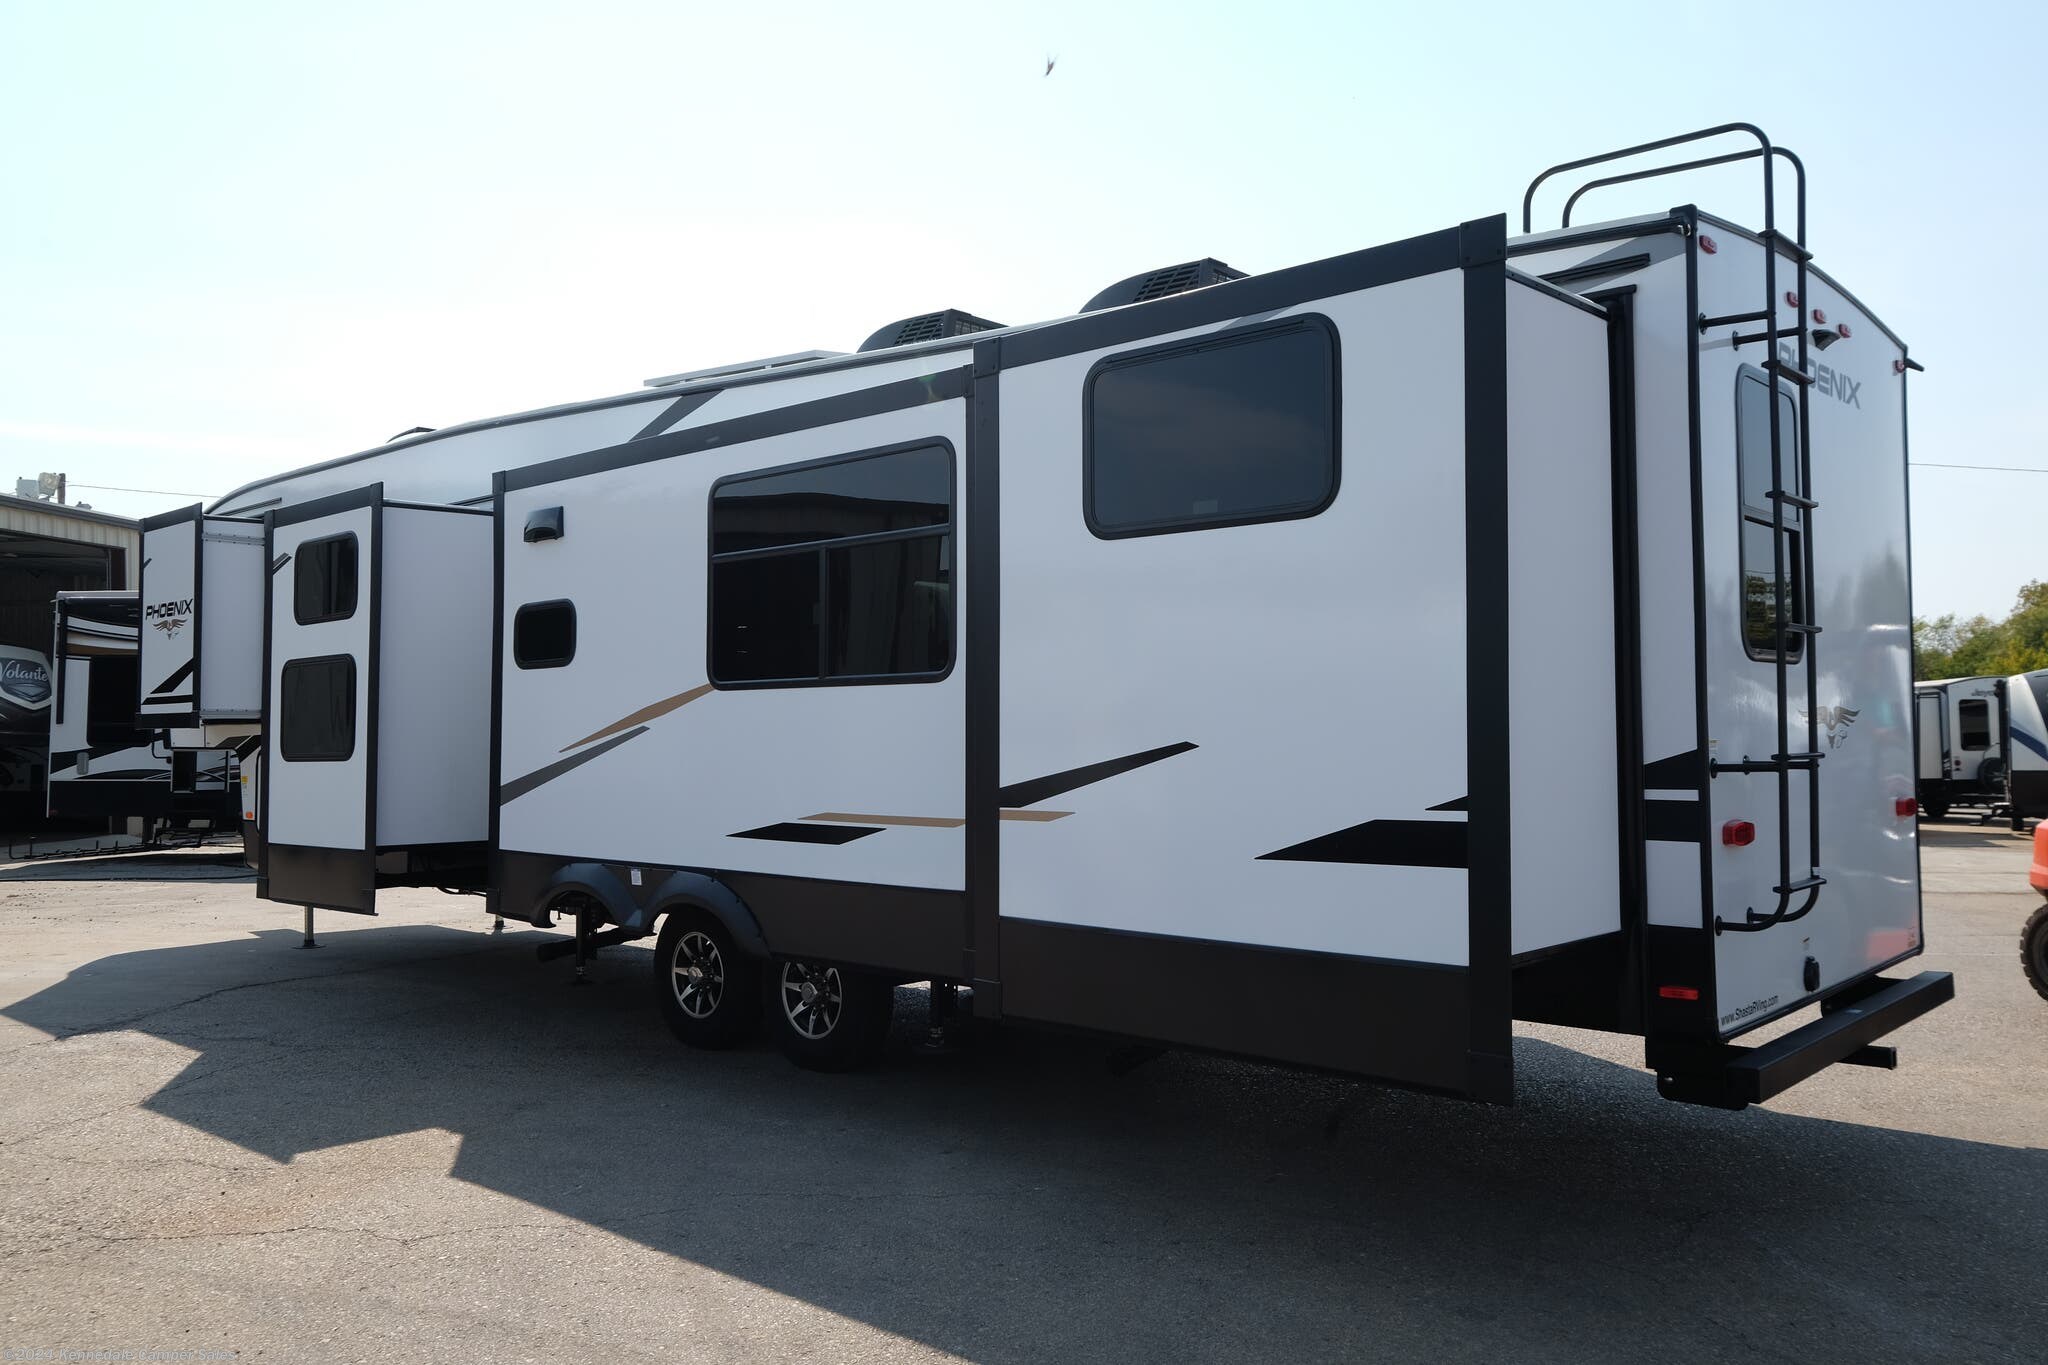 2023 Shasta Phoenix 373MBRB RV for Sale in Kennedale, TX 76060 001909